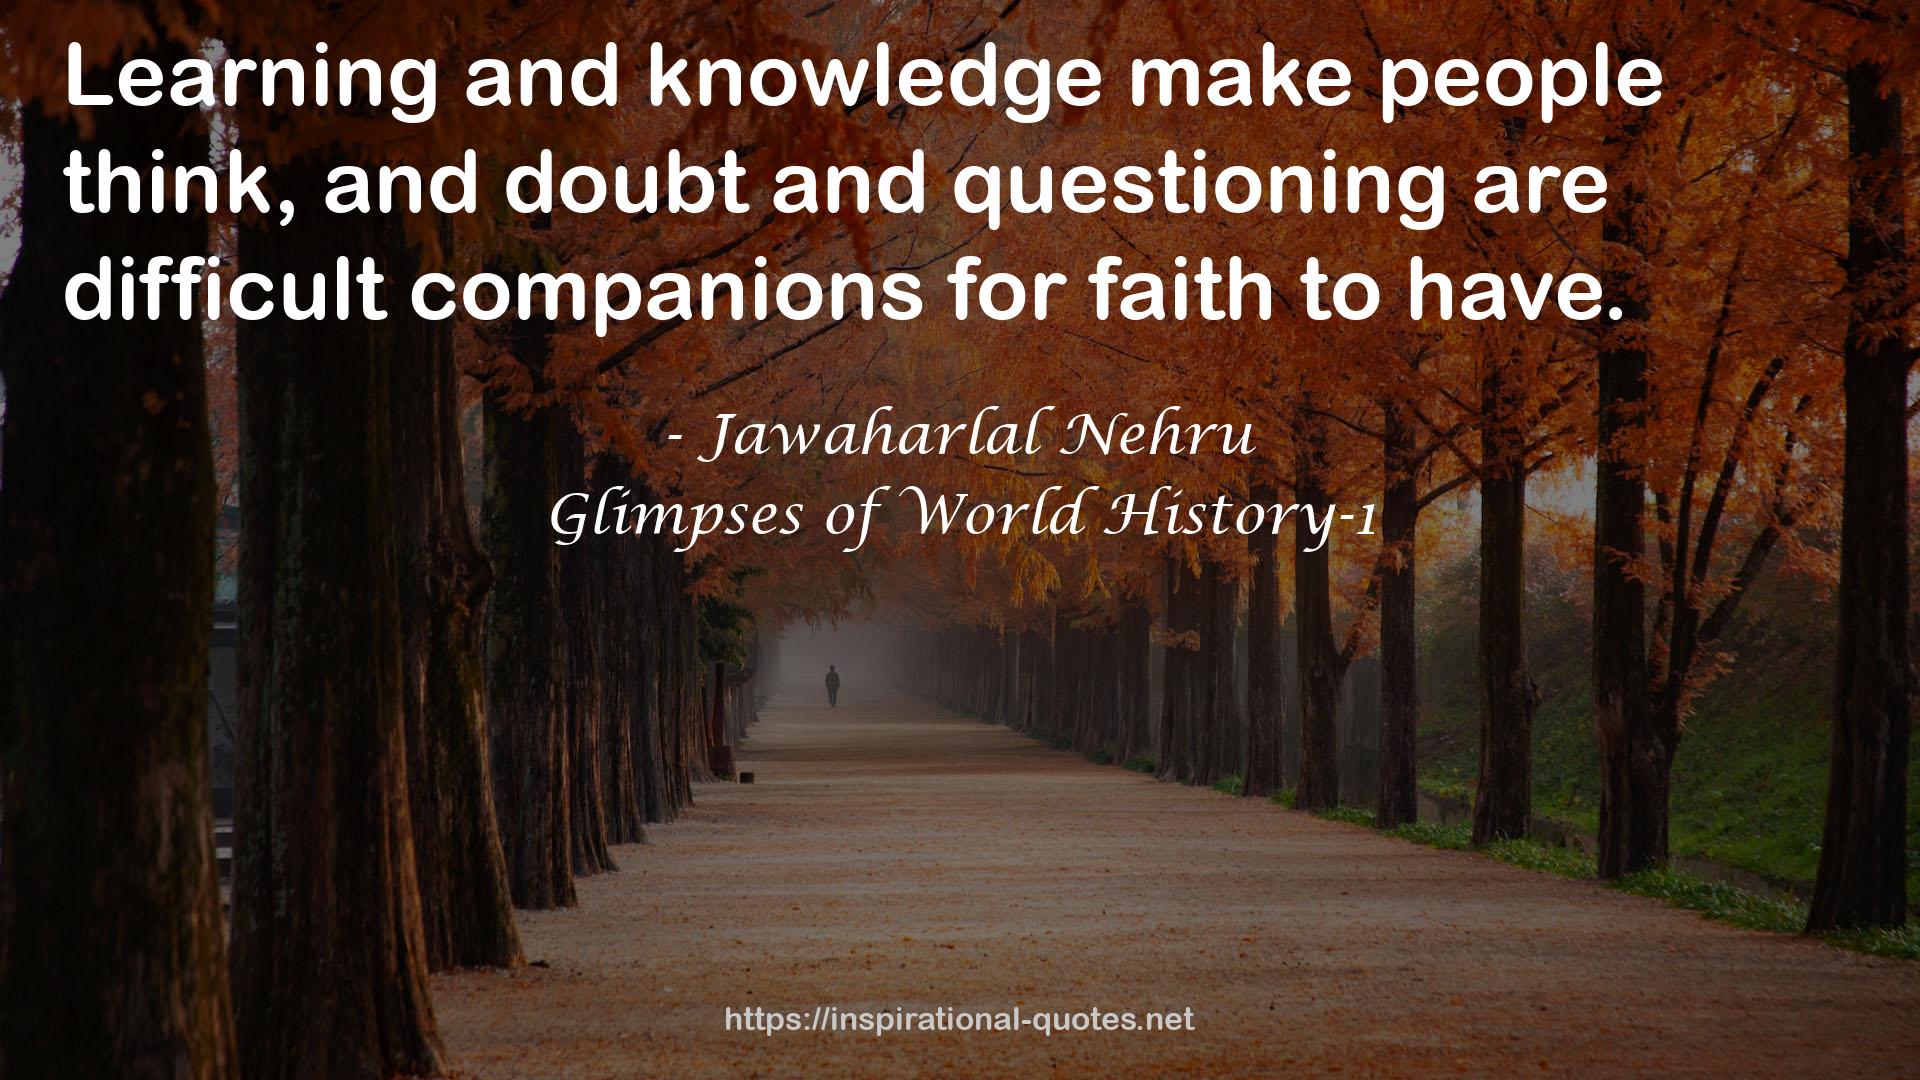 Glimpses of World History-1 QUOTES